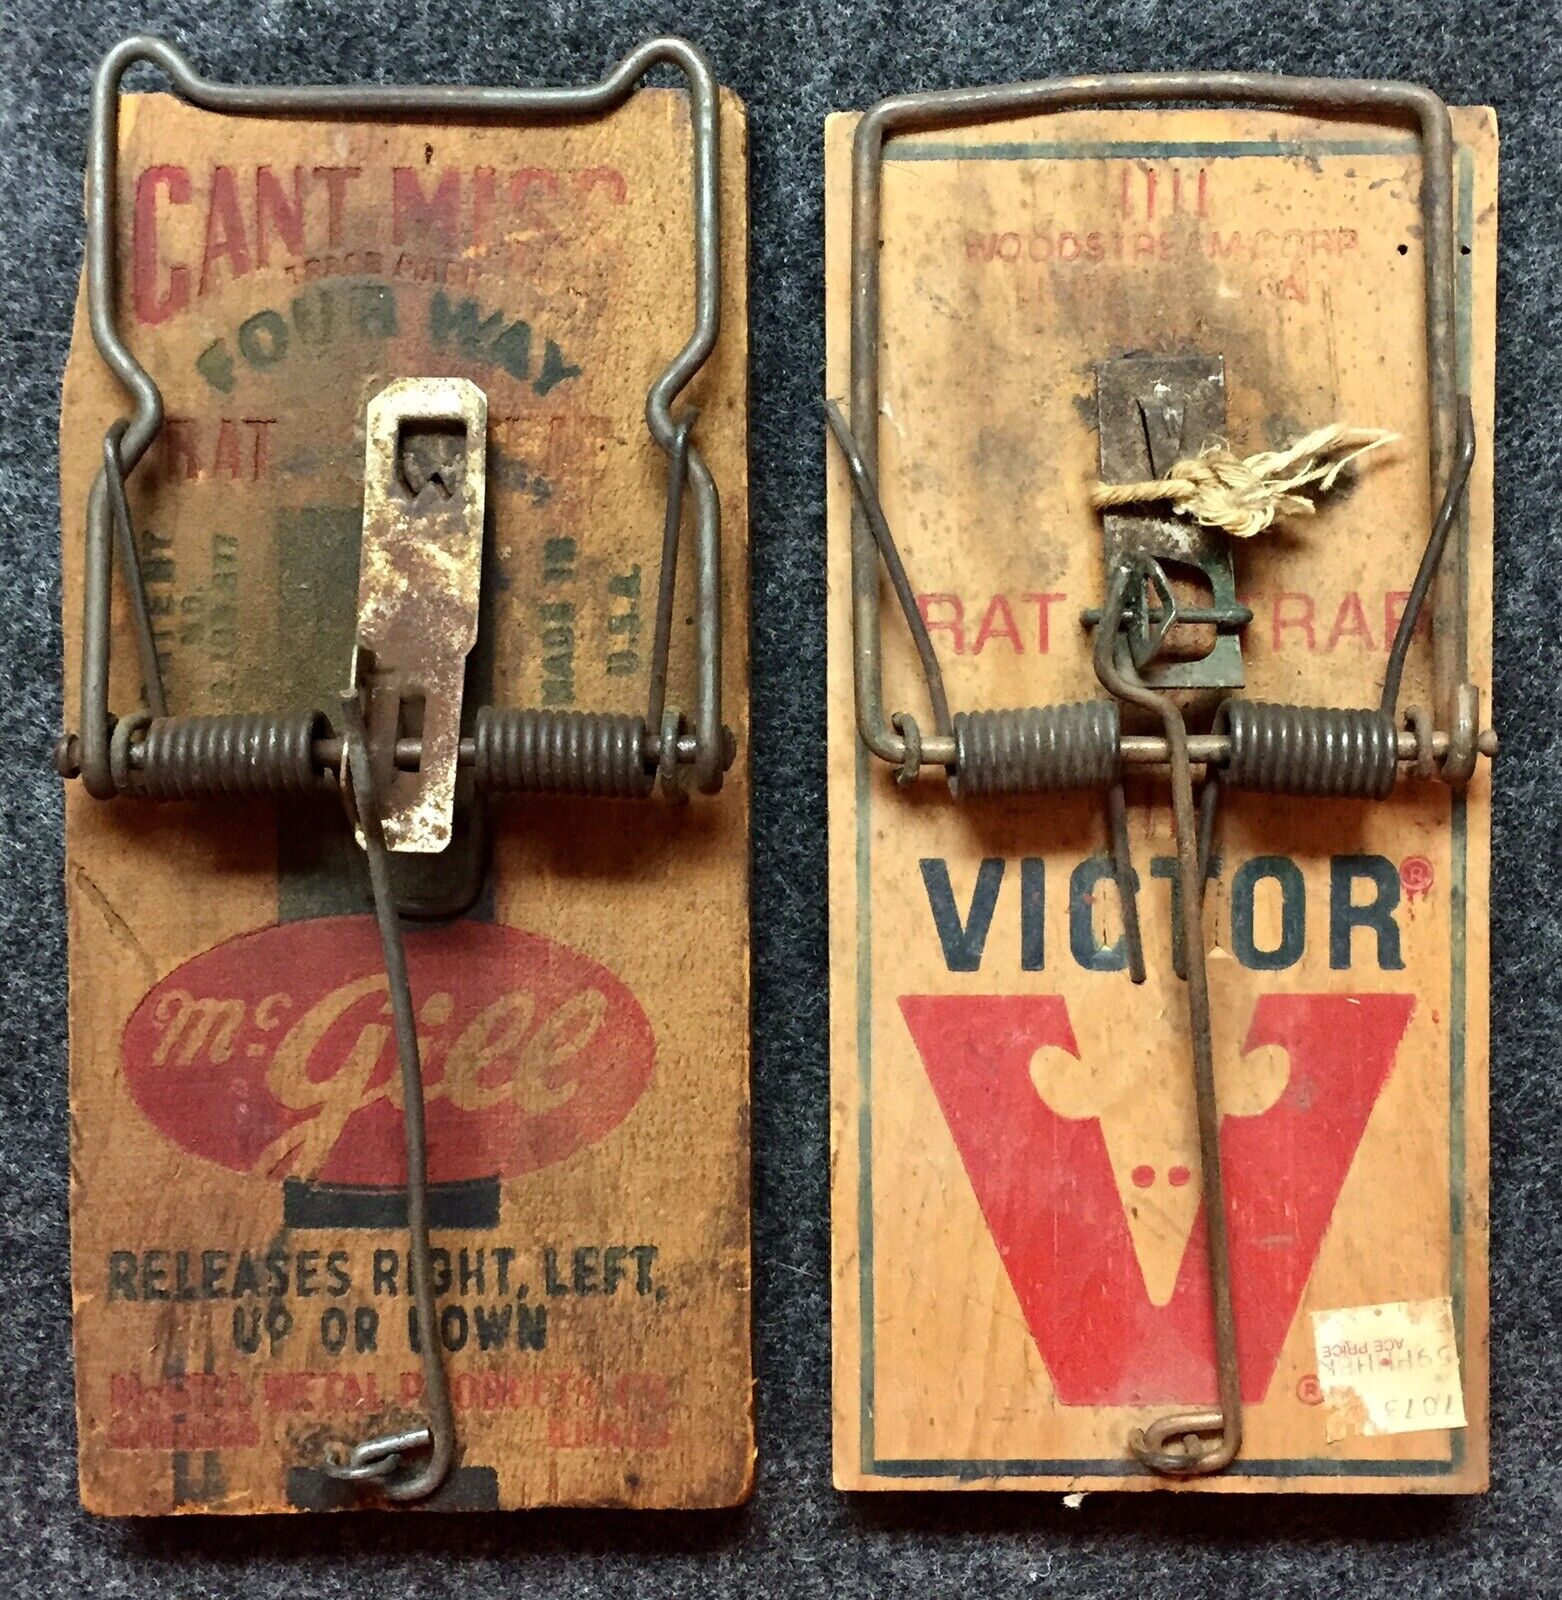 2 Vintage Wooden Rat Traps VICTOR, McGILL Four Way Can’t Miss Man Cave Decor FC